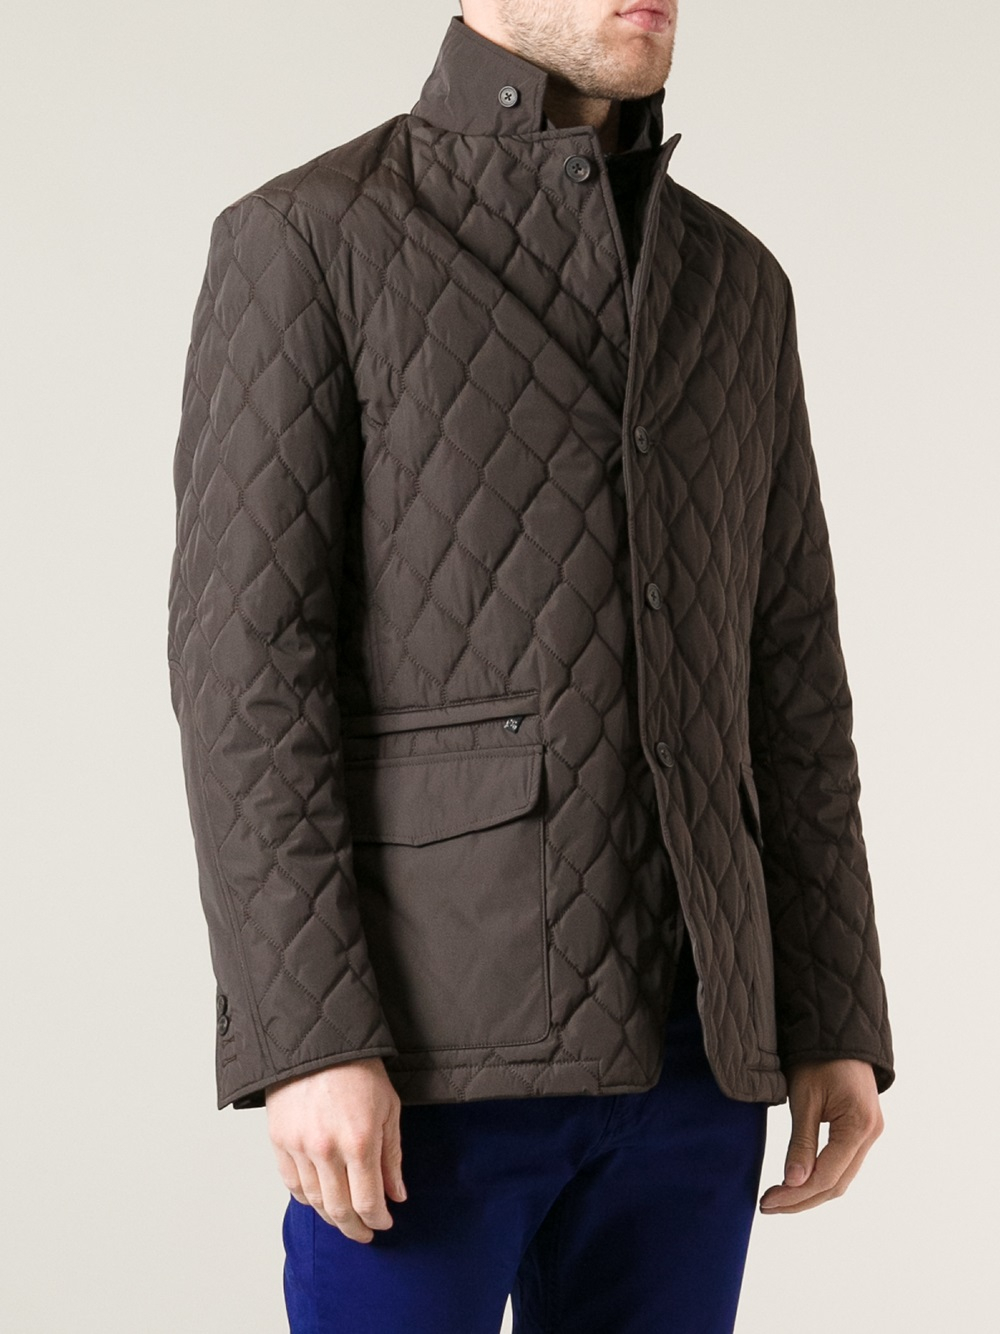 Lyst - Corneliani Quilted Jacket in Brown for Men